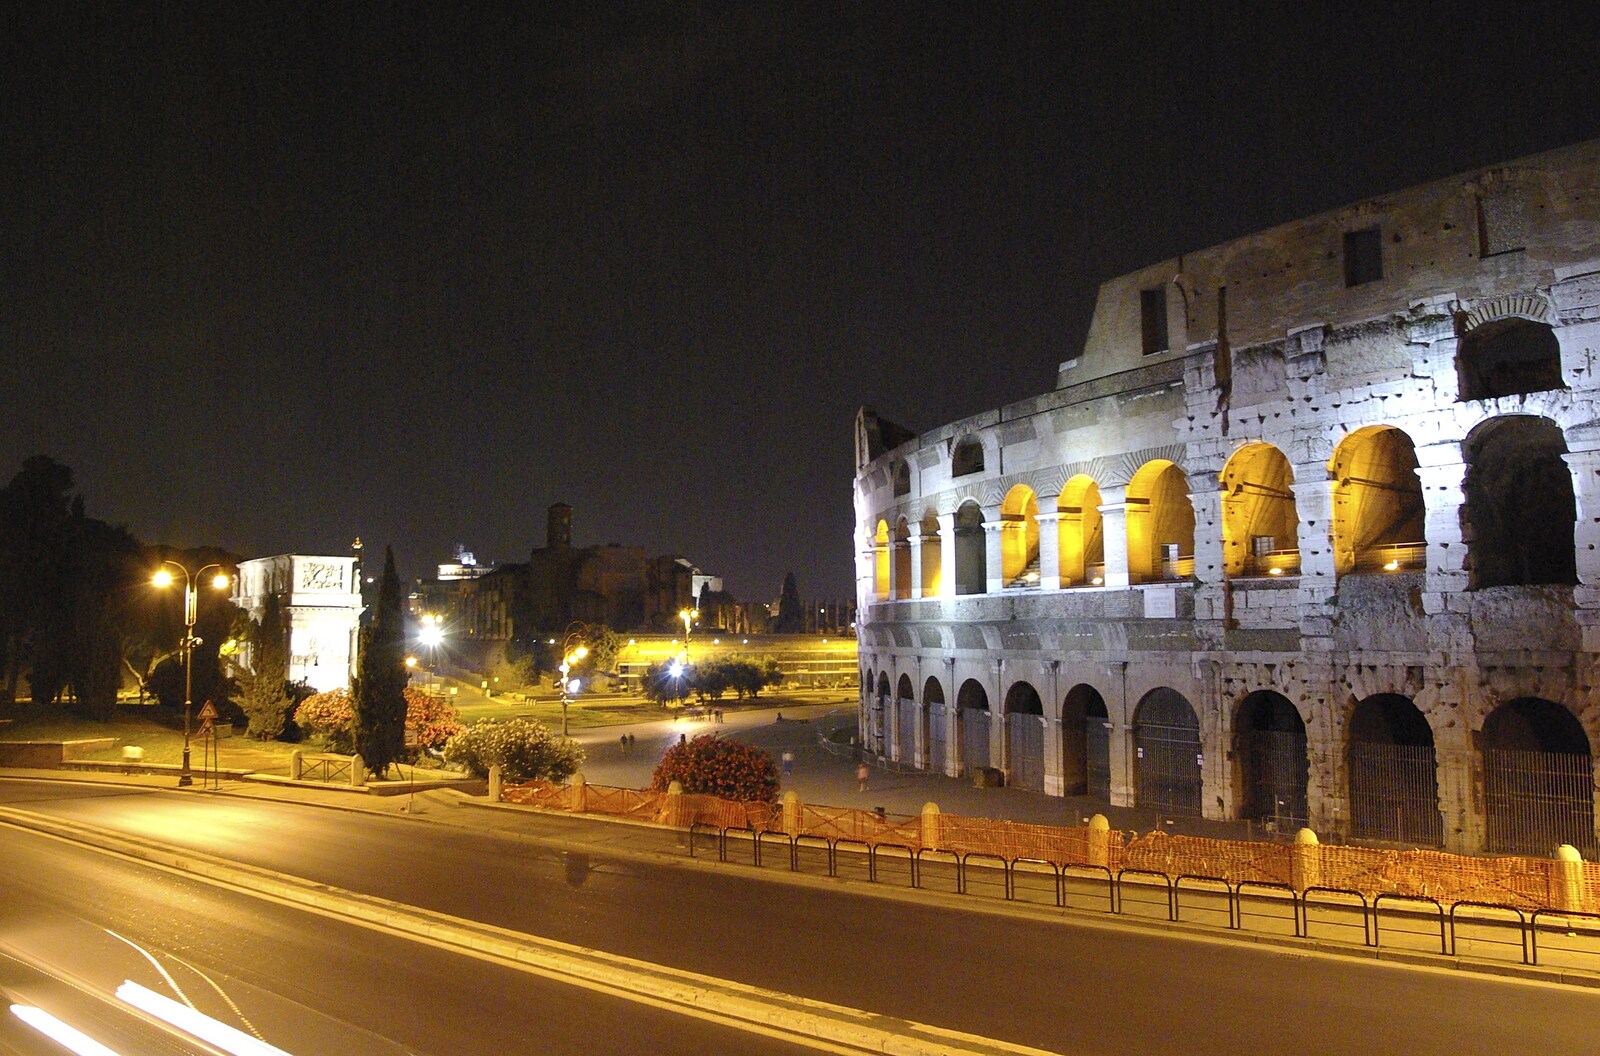 A Sojourn in The Eternal City, Rome, Italy - 22nd July 2008: The back of the Colloseum at night